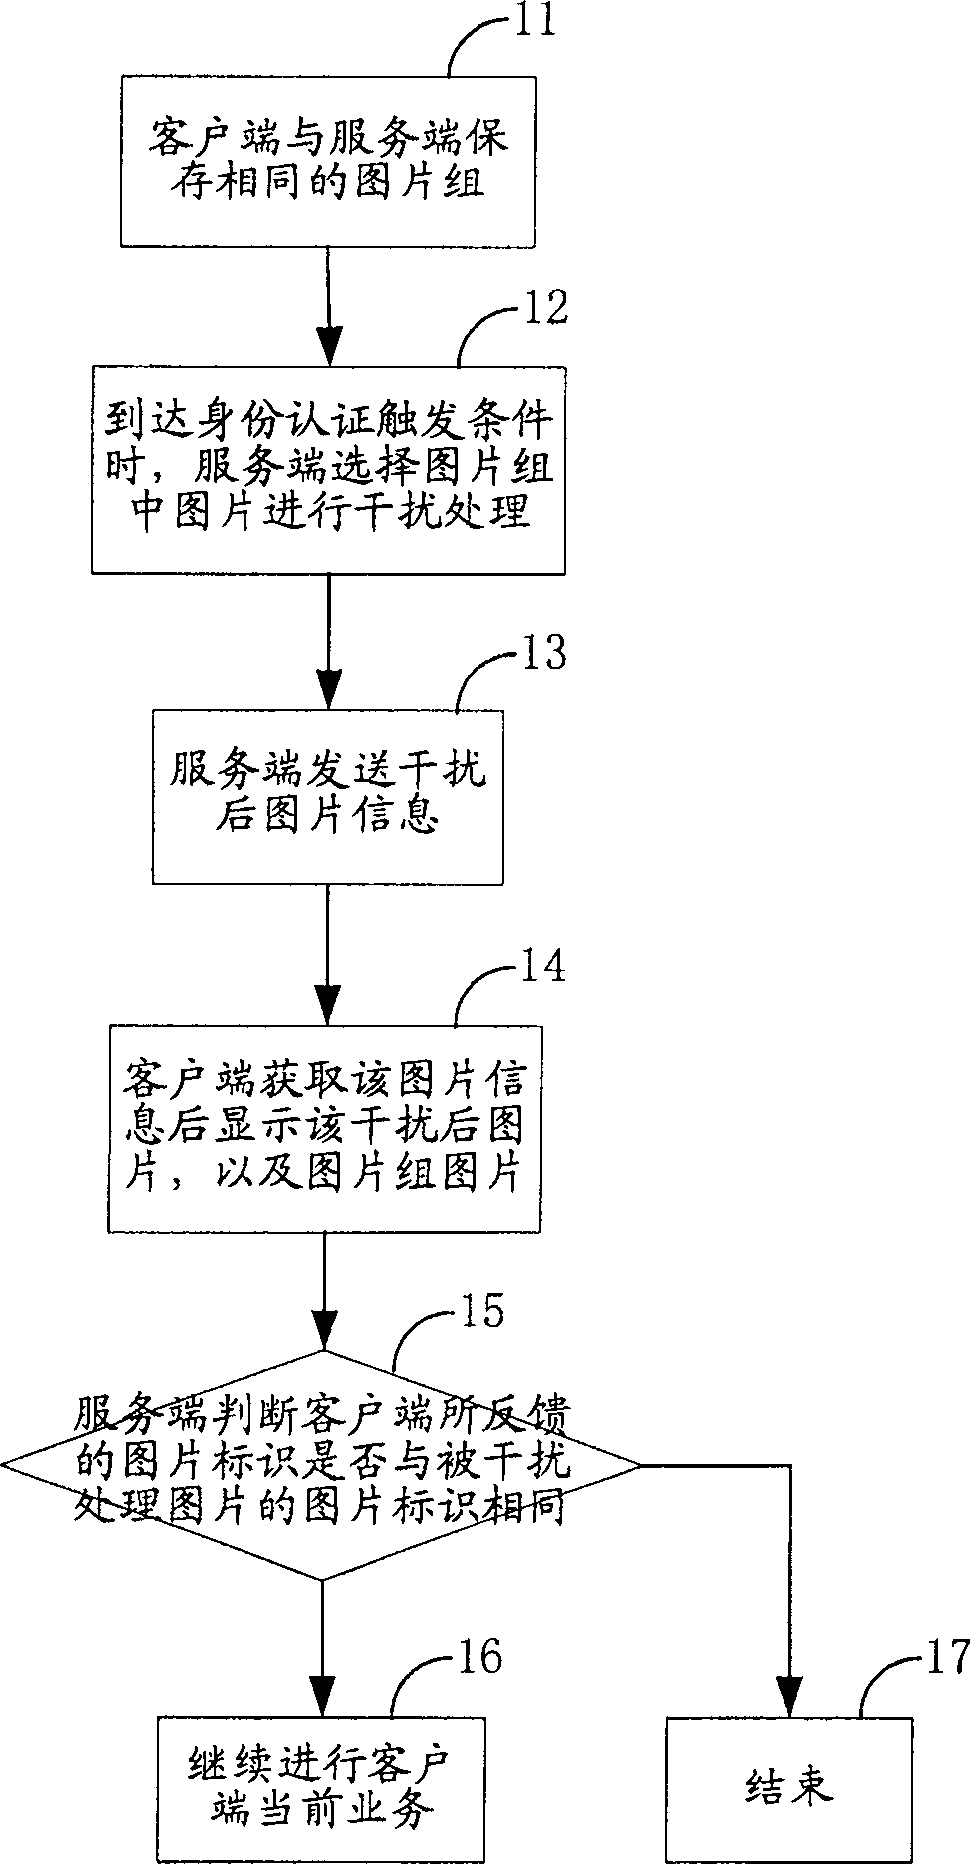 Method for authentication of identity of network user